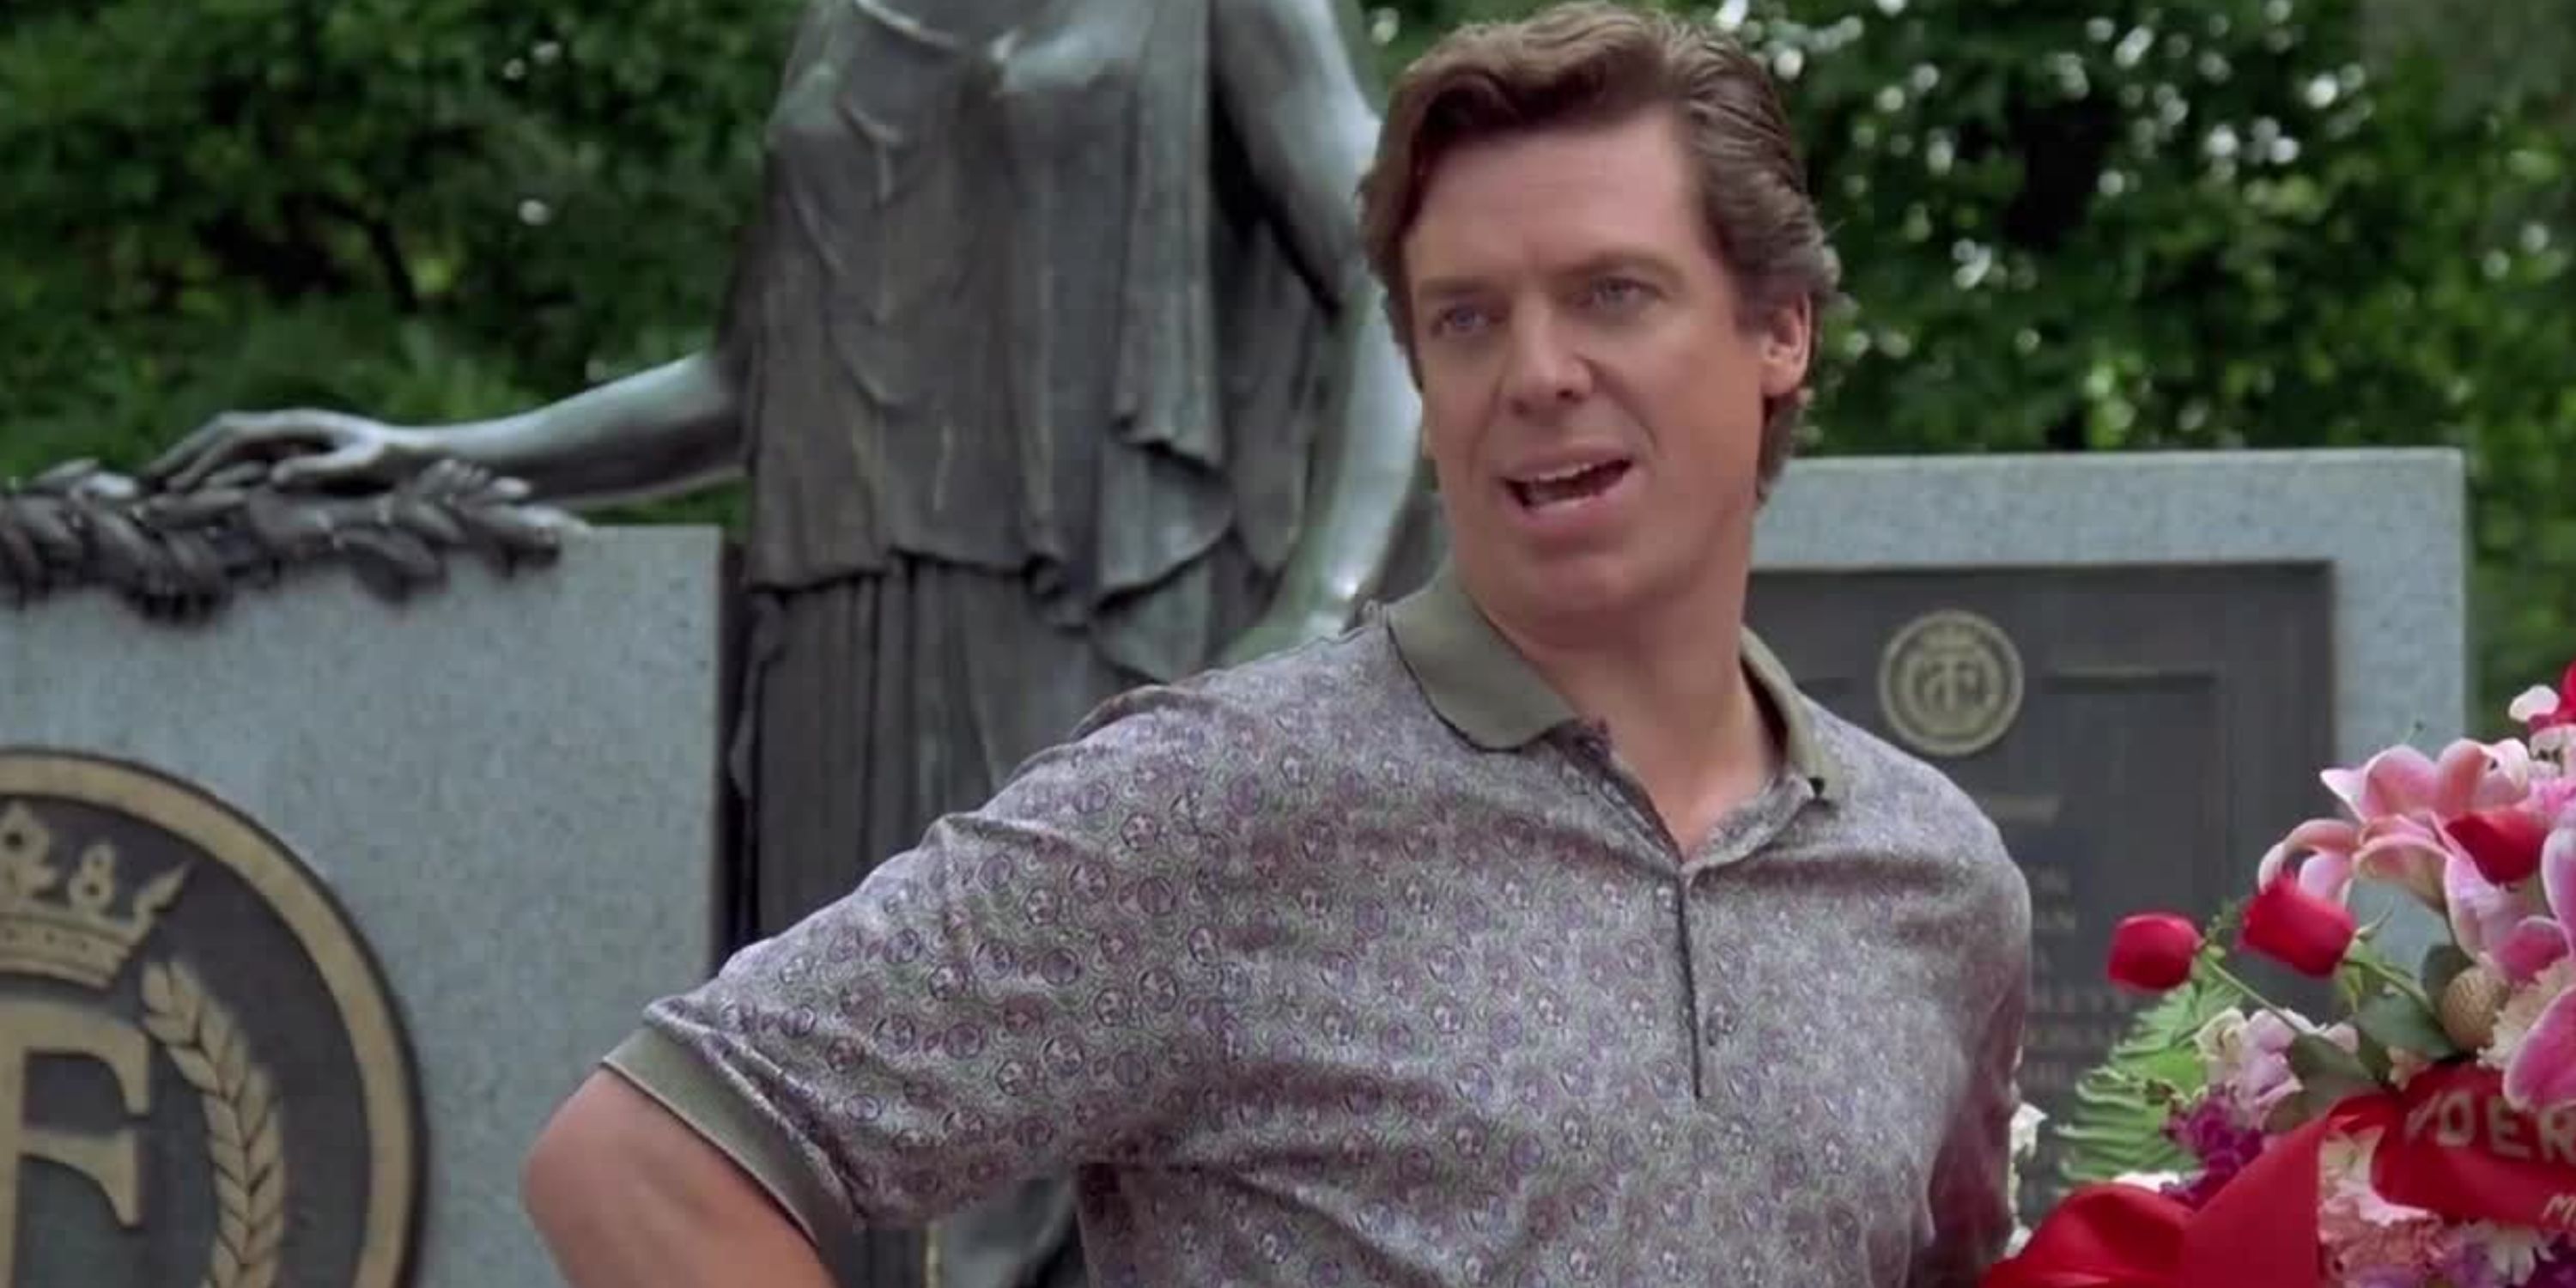 Shooter McGavin at Chubbs' funeral in Happy Gilmore